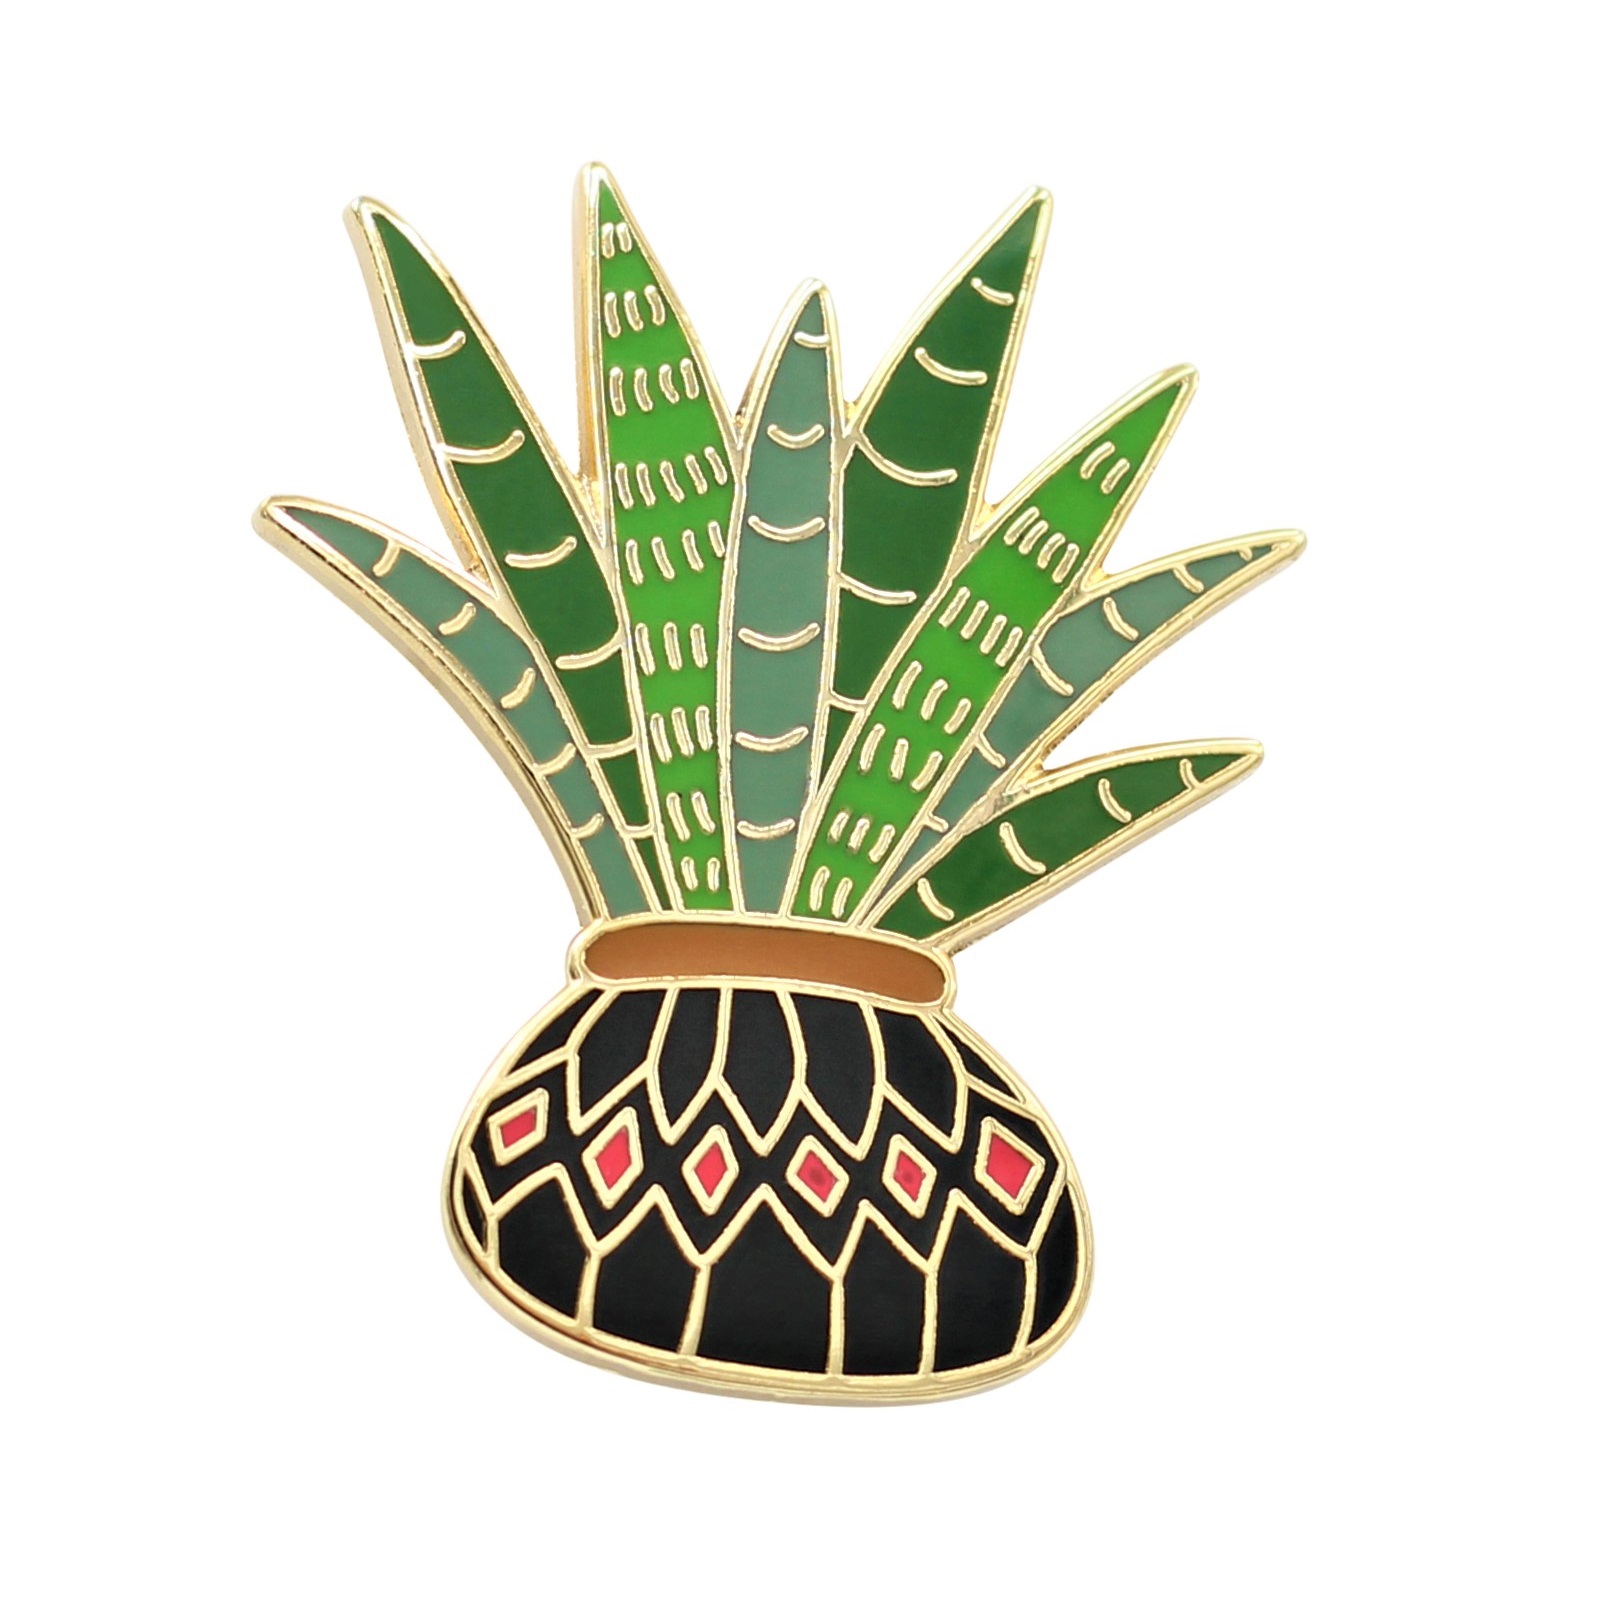 Aloe Vera Plant Enamel Pins by Real Sic - Pins for Your Life